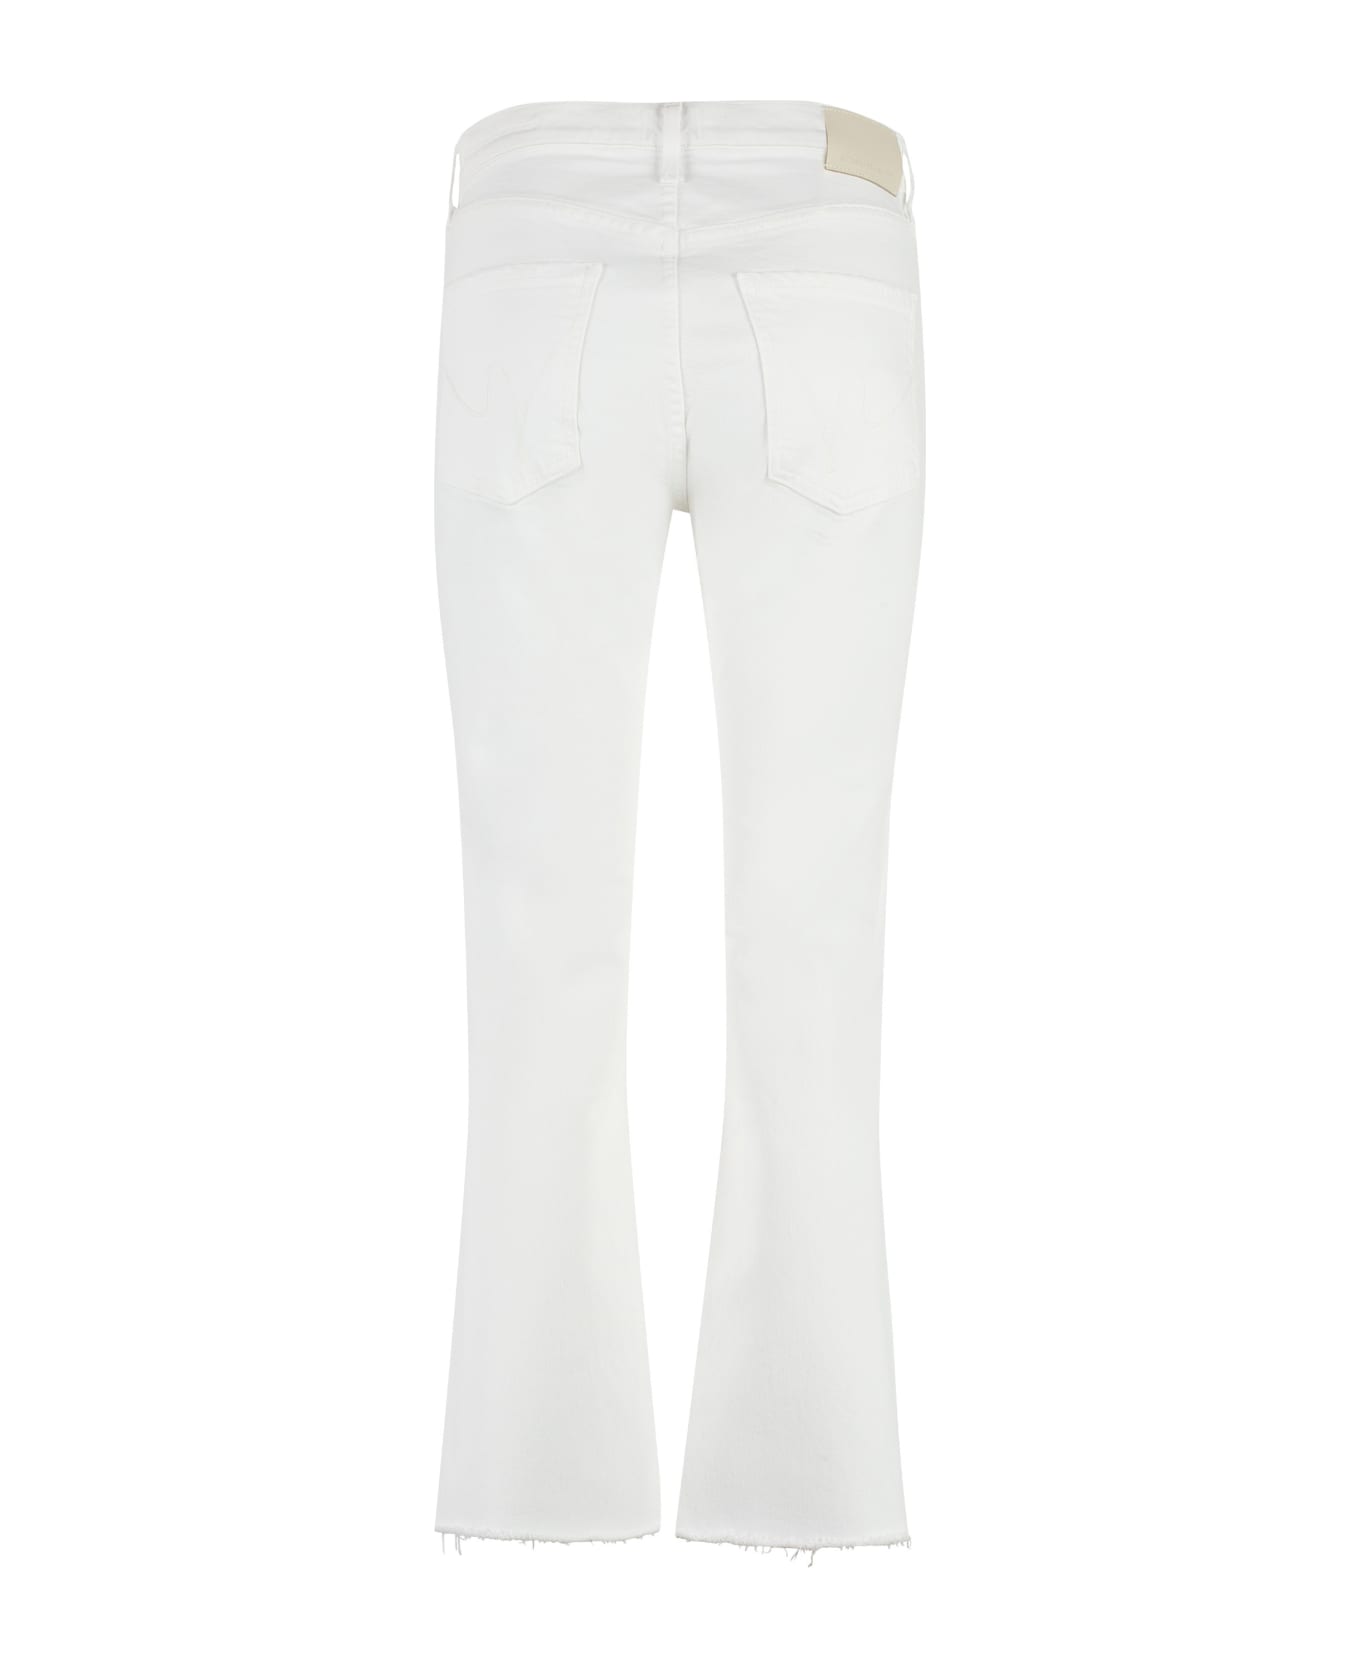 Citizens of Humanity Isola Jeans - MAYFAIR WHITE デニム